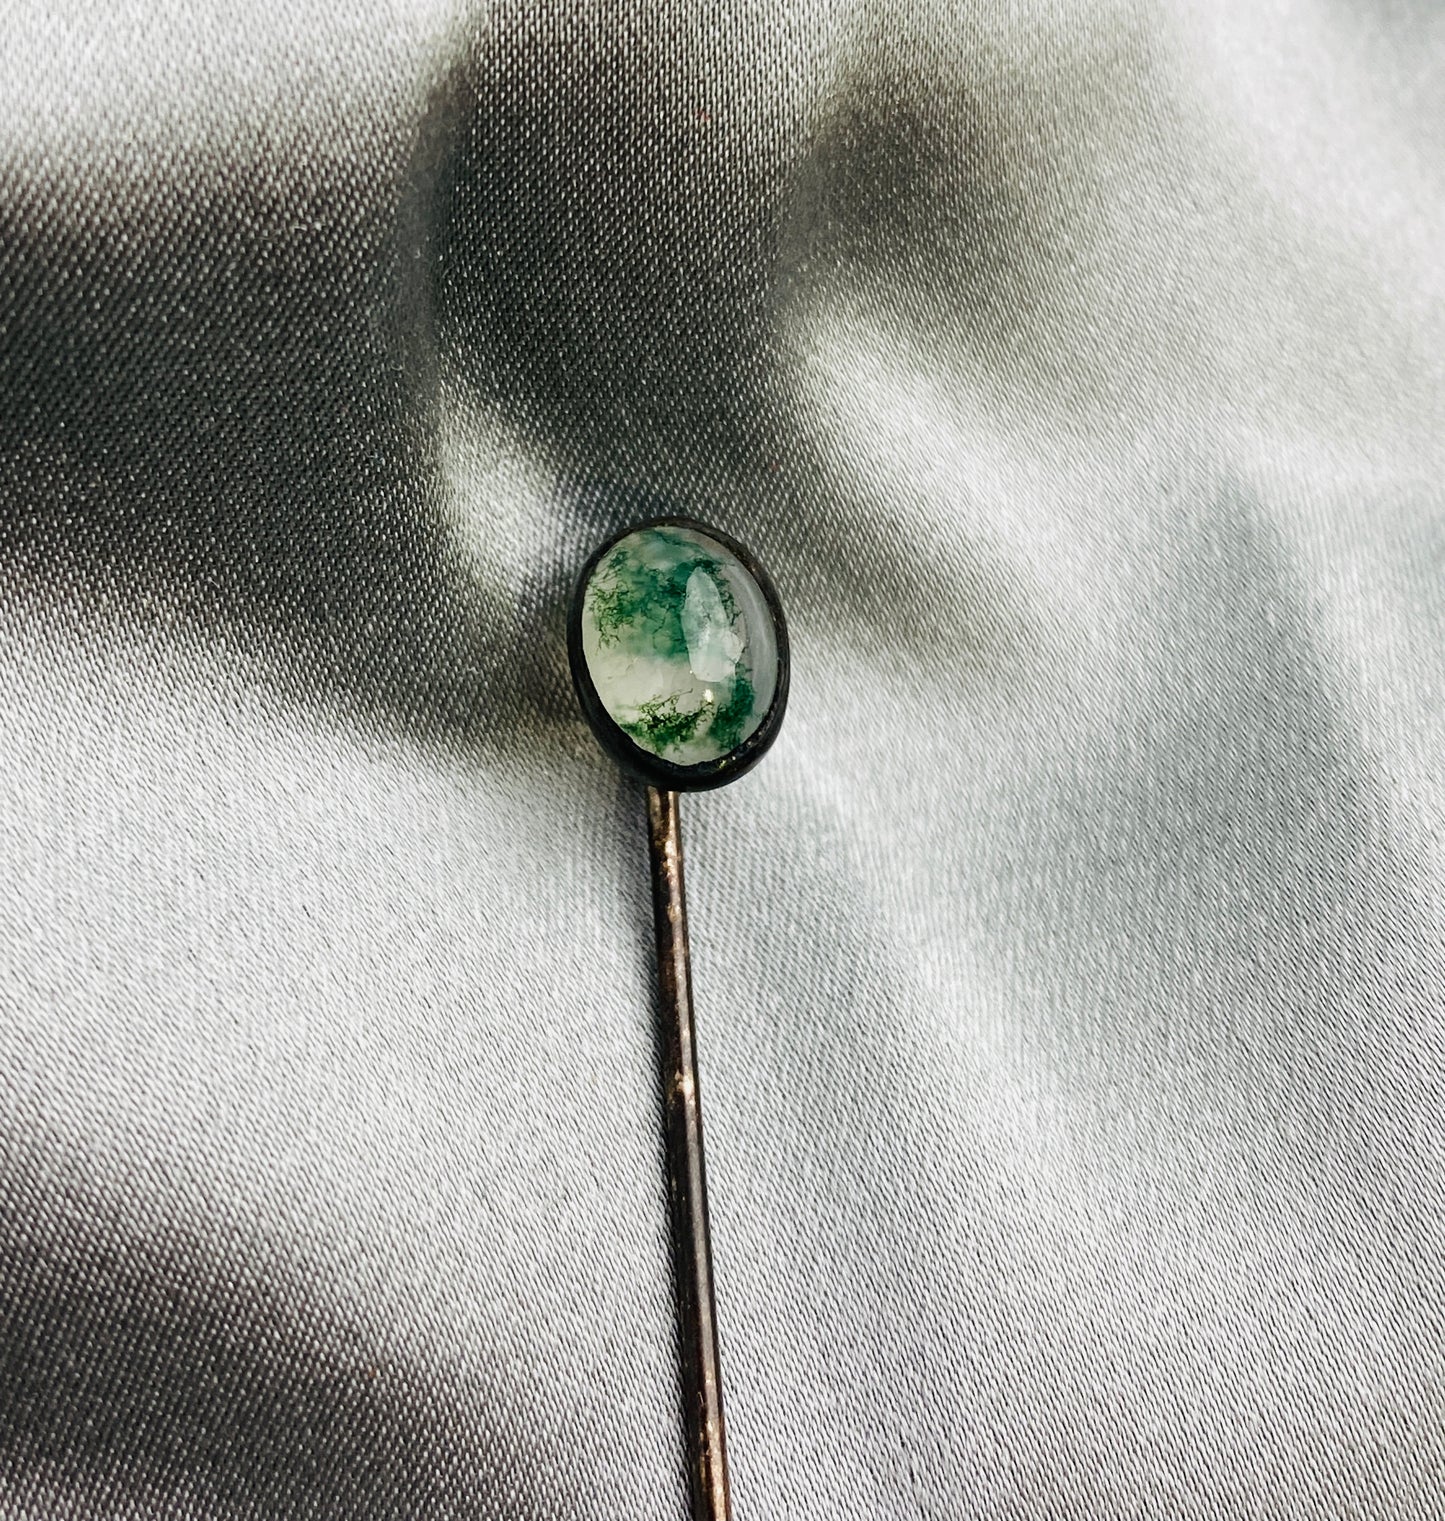 Antique 1910s Small Oval Clear Green-Speckled Glass Hat Pin